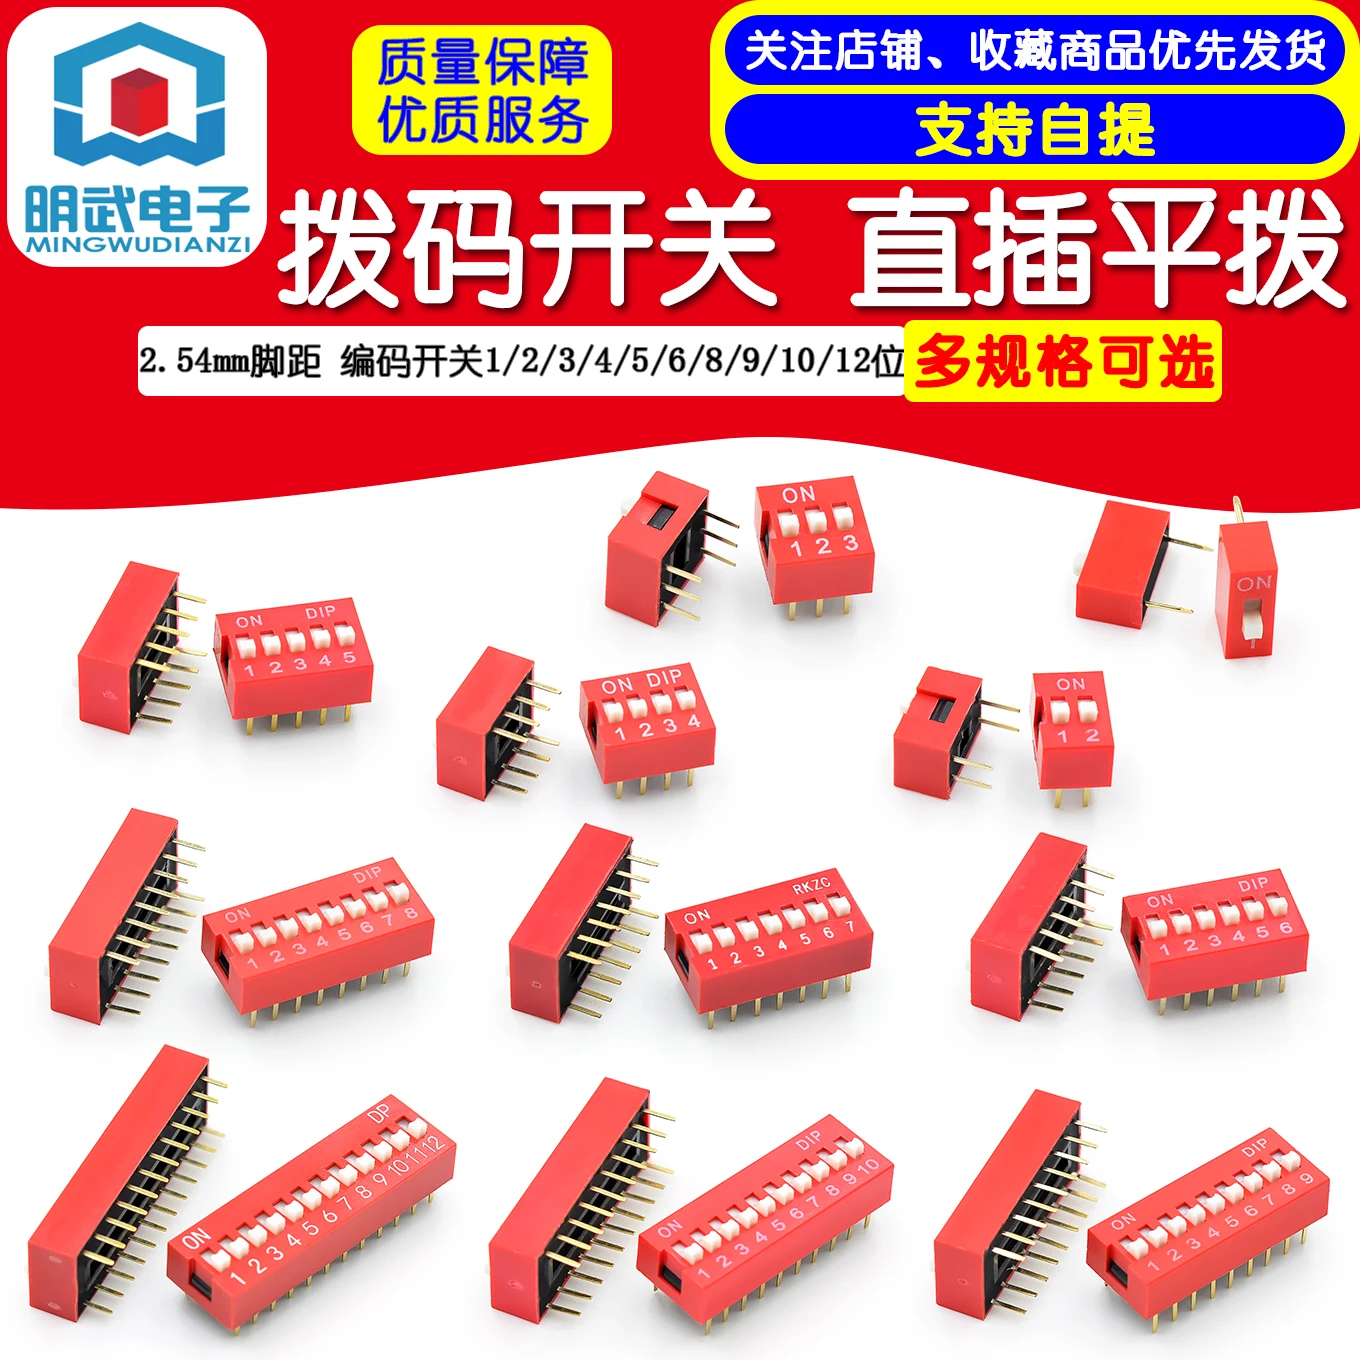 DIP switch Straight-insertion flat dial 2.54mm pitch Code switch 1/2/3/4/5/6/8/9/10/12 bits